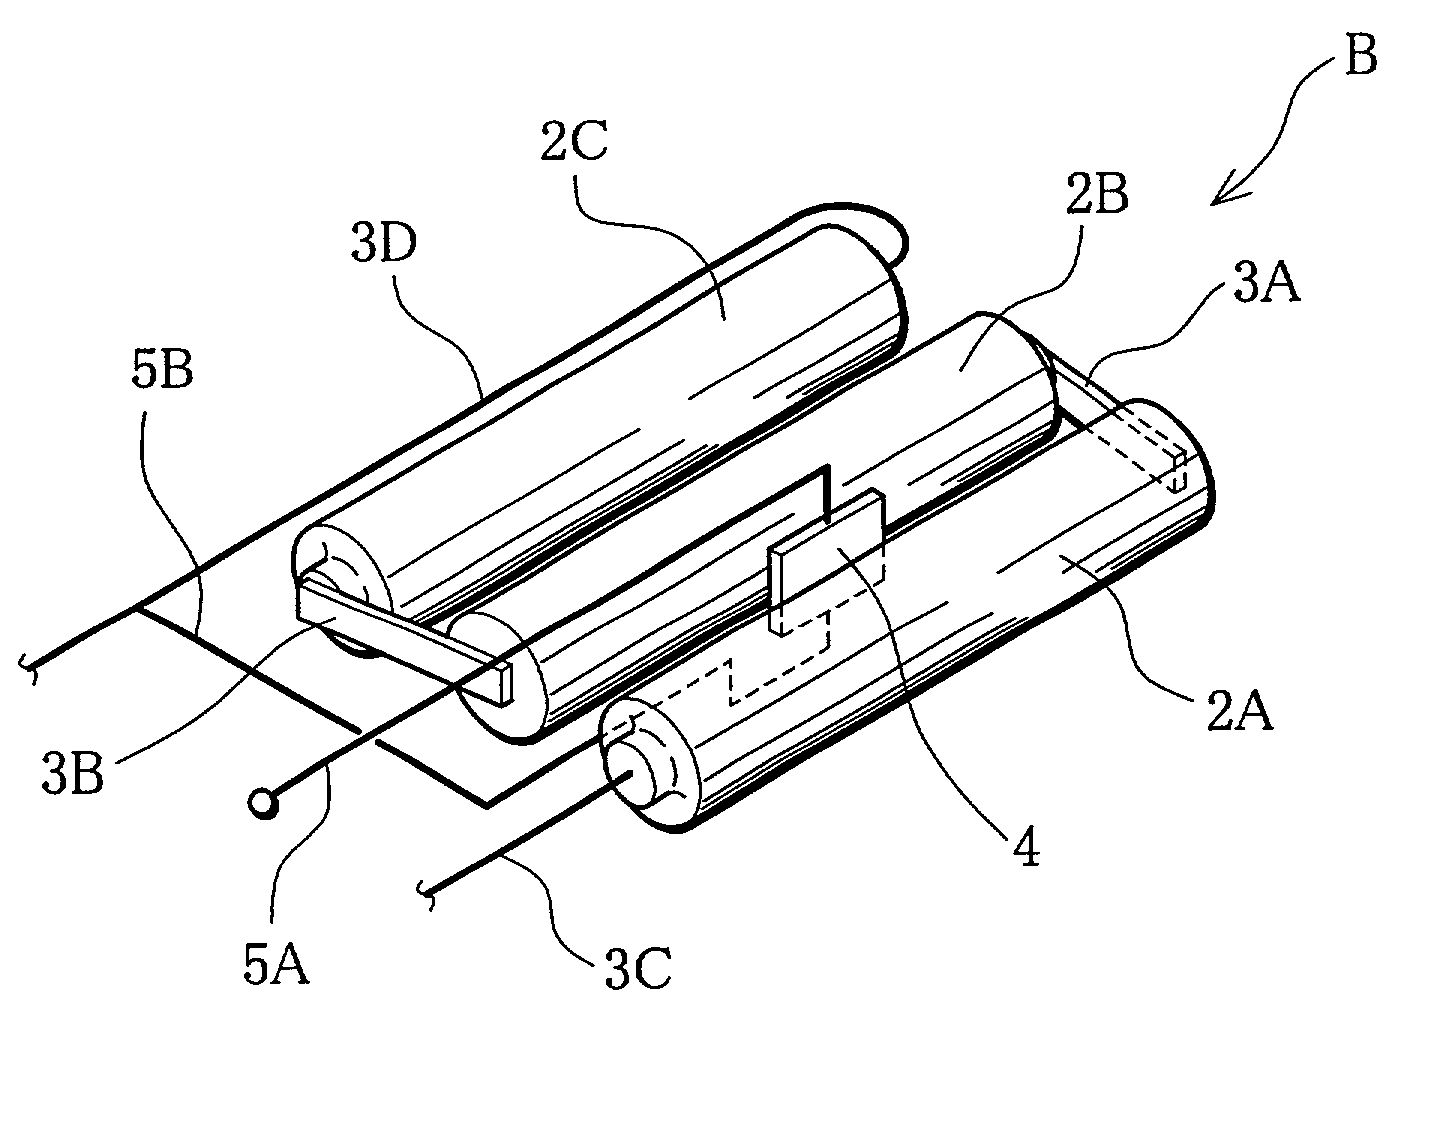 Battery, lead memver for battery connection, and battery pack using the same